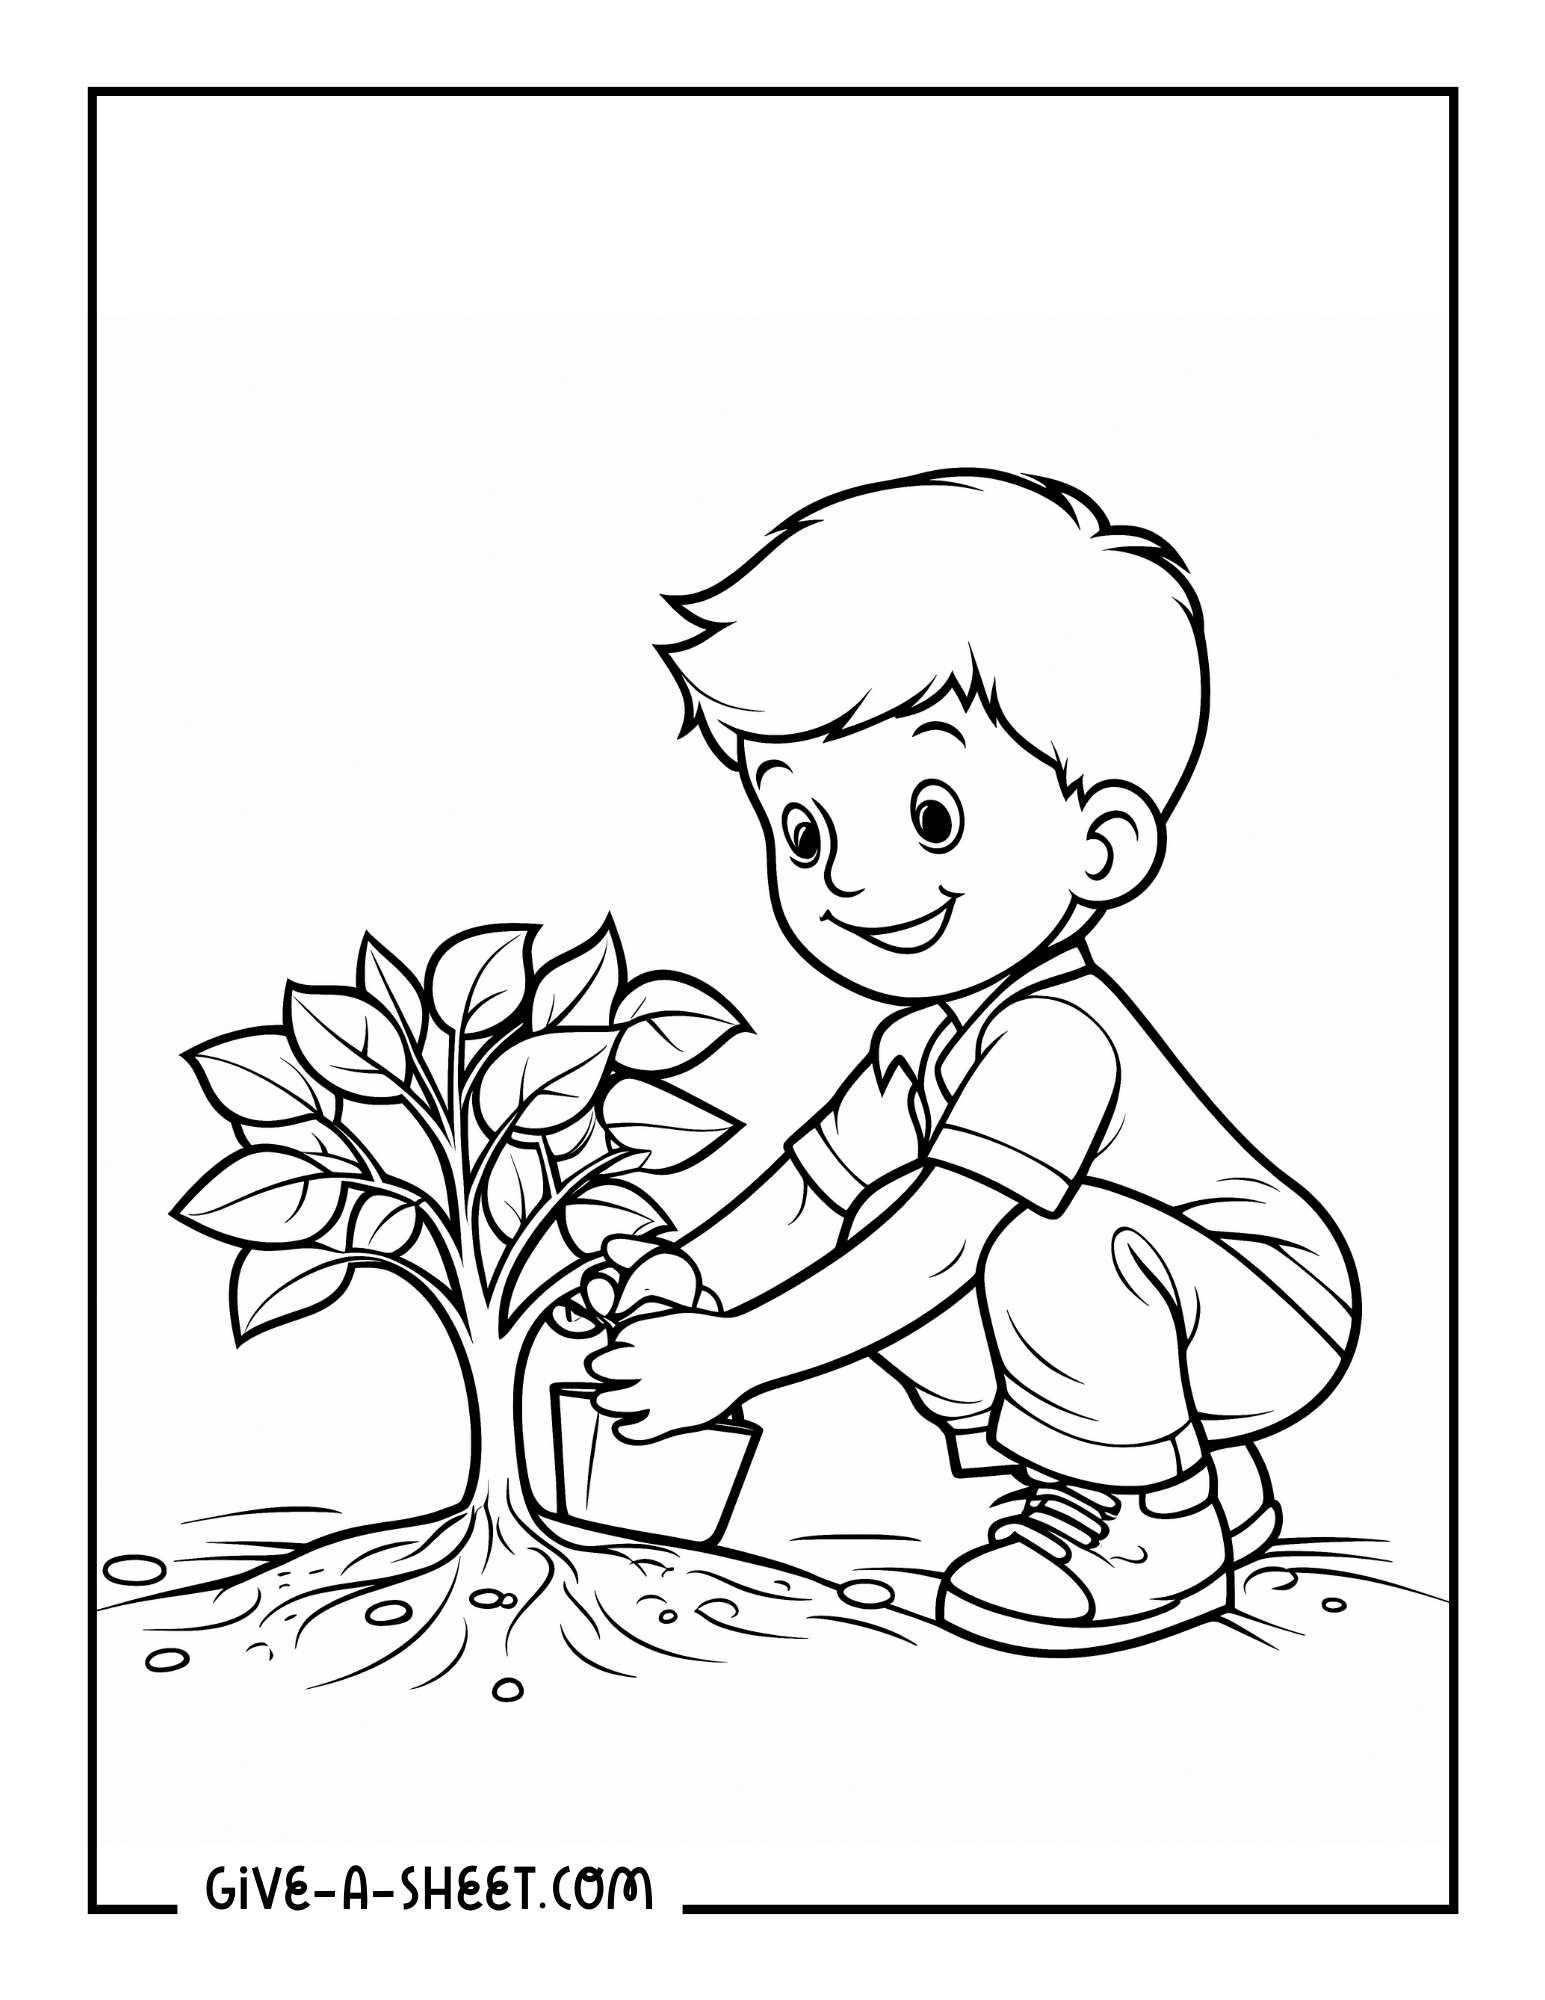 Fall bucket list arborist coloring page for kids.